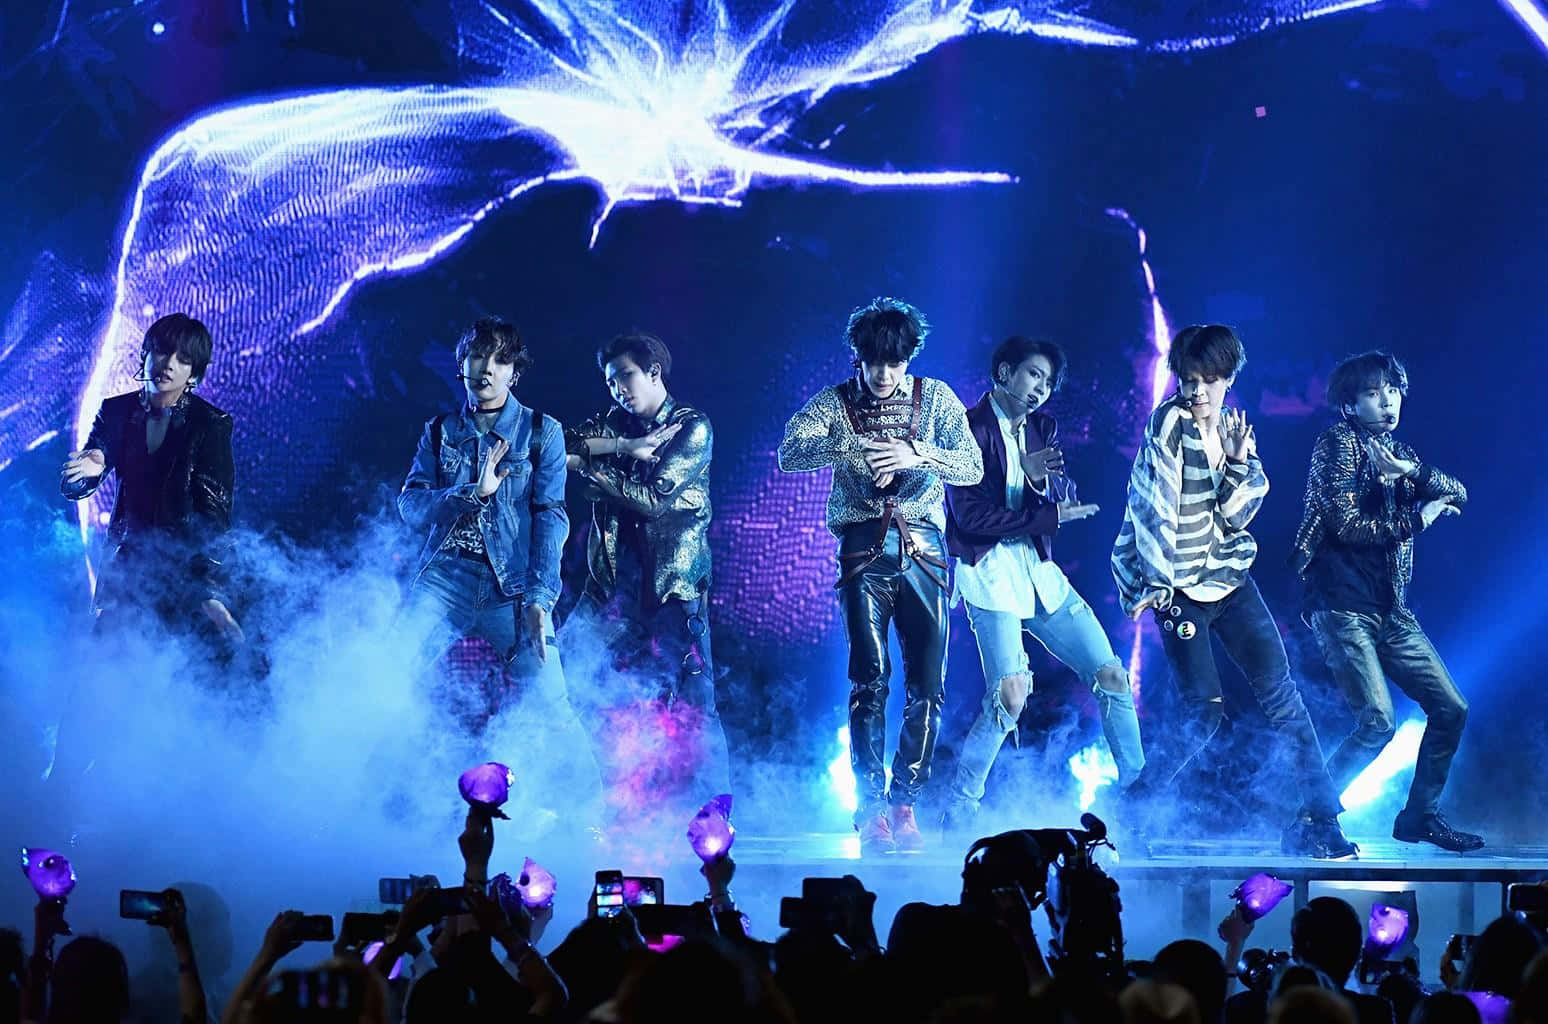 BTS rocks the stage at their world tour concert!